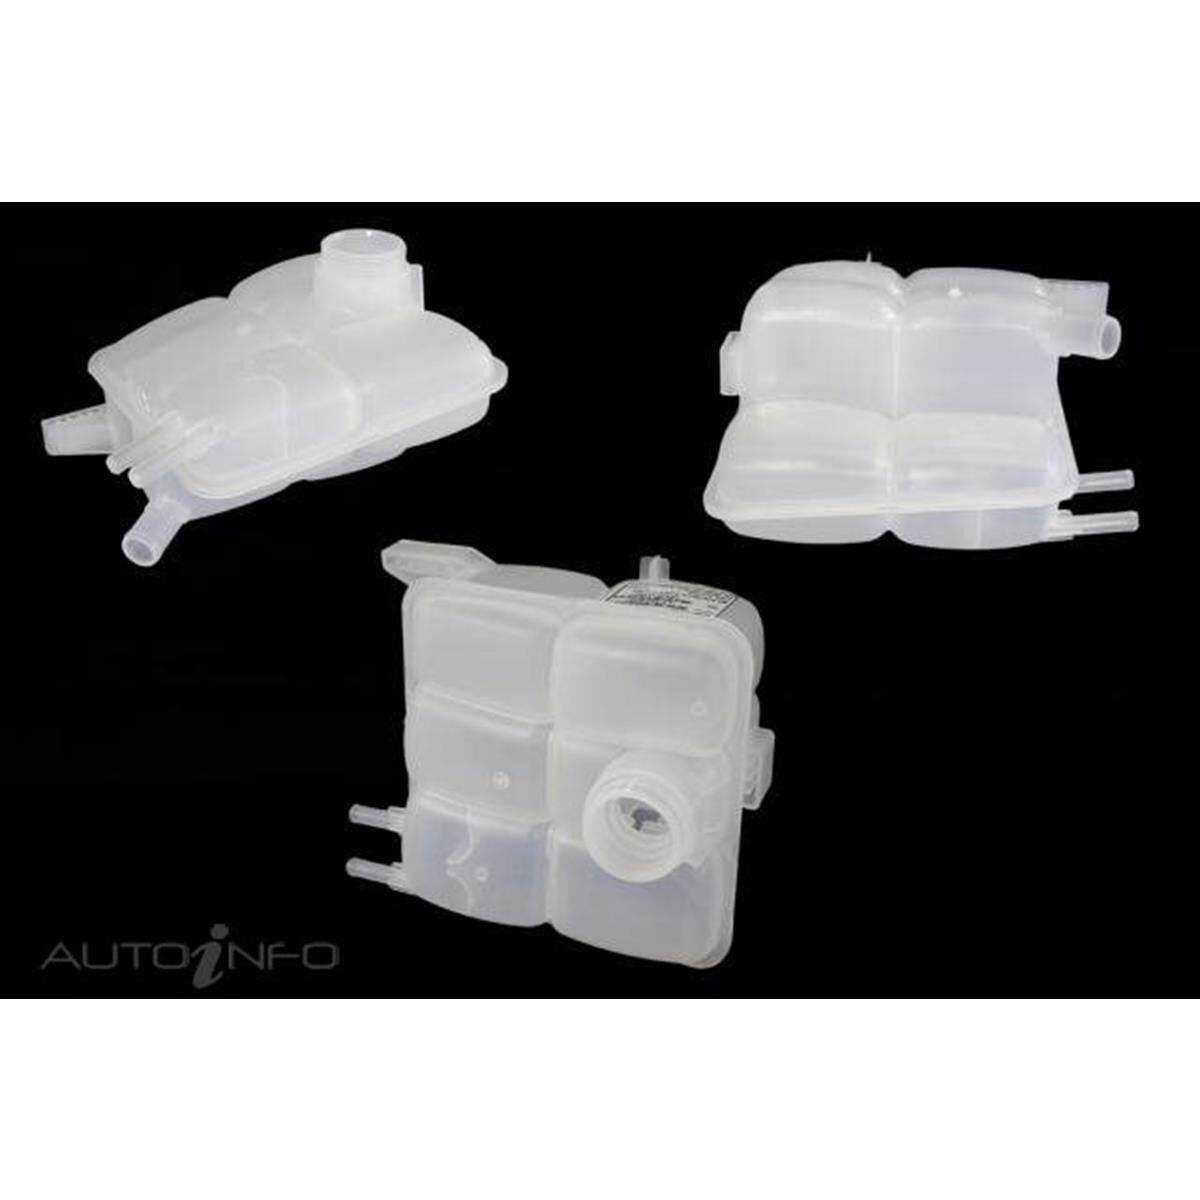 Coolant Tank Reservoir Coolant Overflow Tank Recovery Bottle Expansion Reservoir BL8Z8A080A Compatible with 2001-2012 F-ord 2001-2011 M-azda 2005-2011 M-ercury 